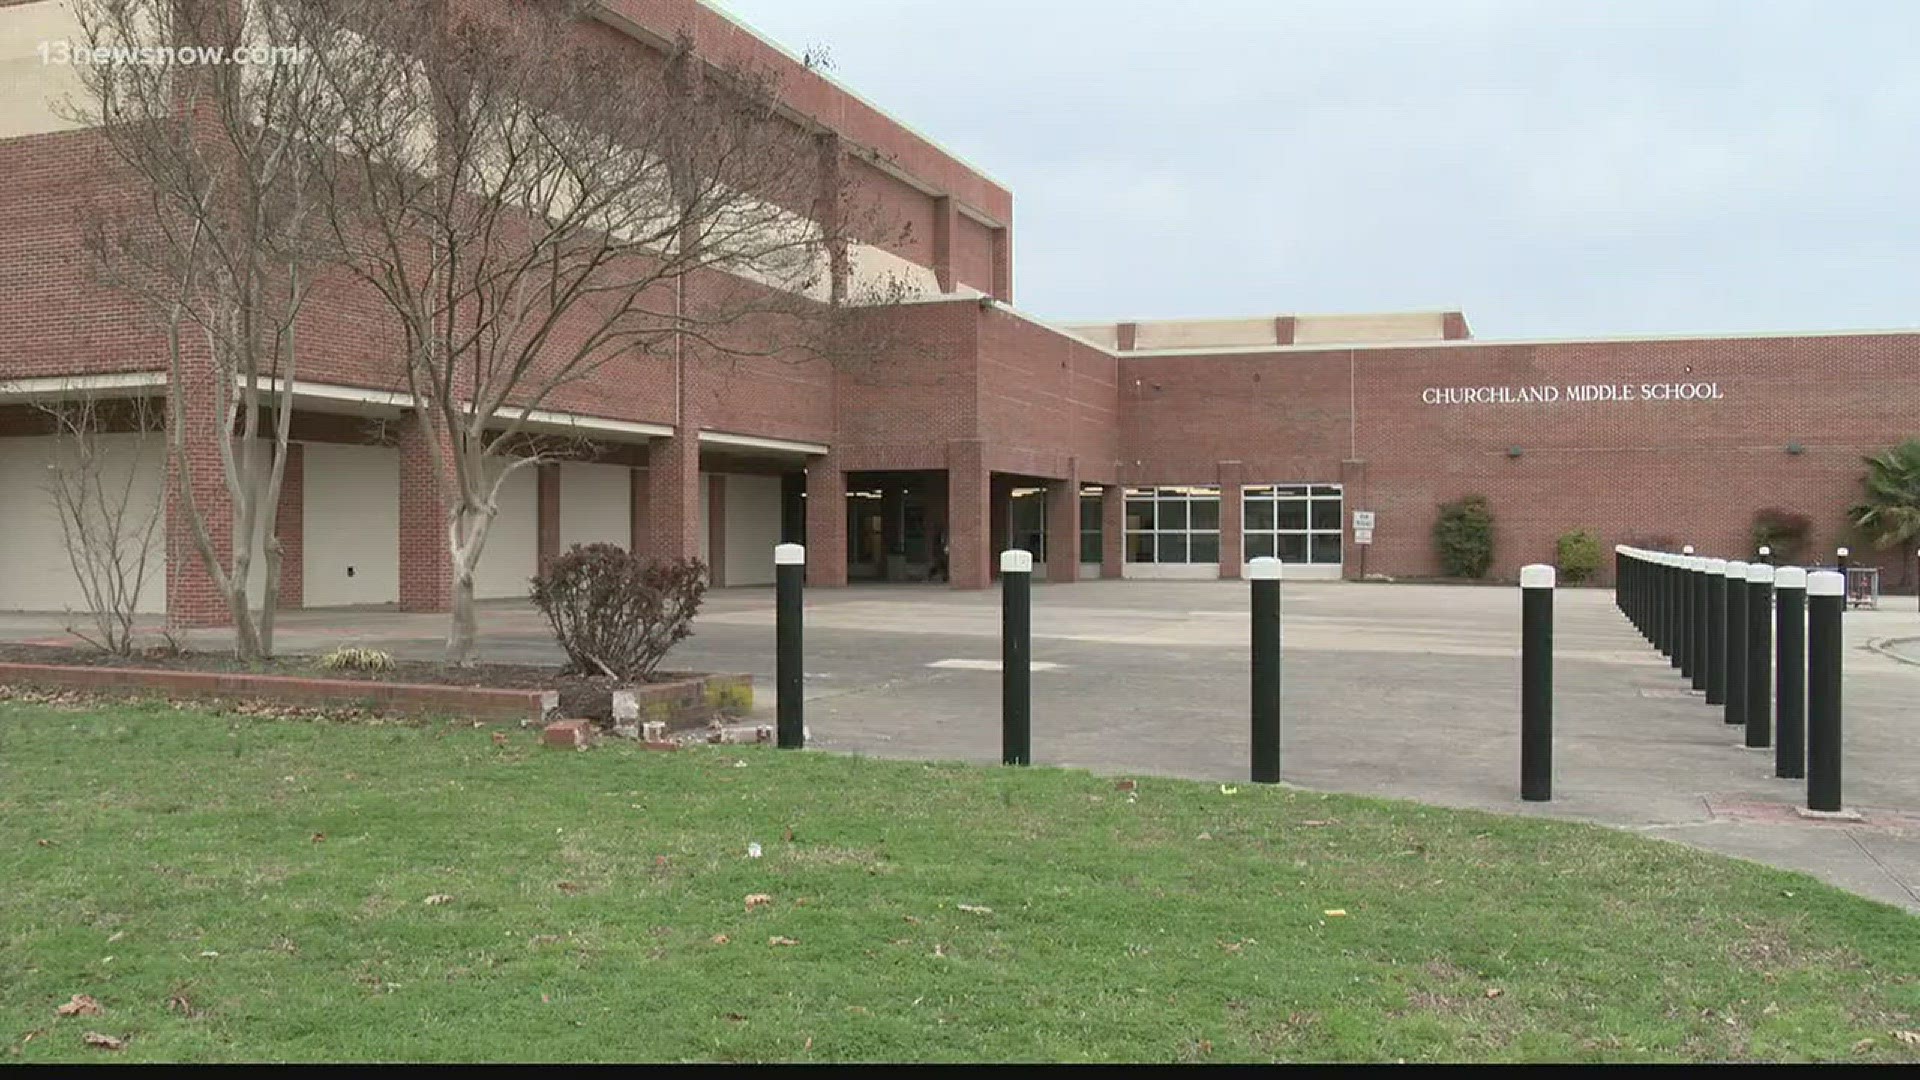 The city of Portsmouth is getting ready to pass its proposed budget for 2019 and the main focus has been putting more money into the school system.